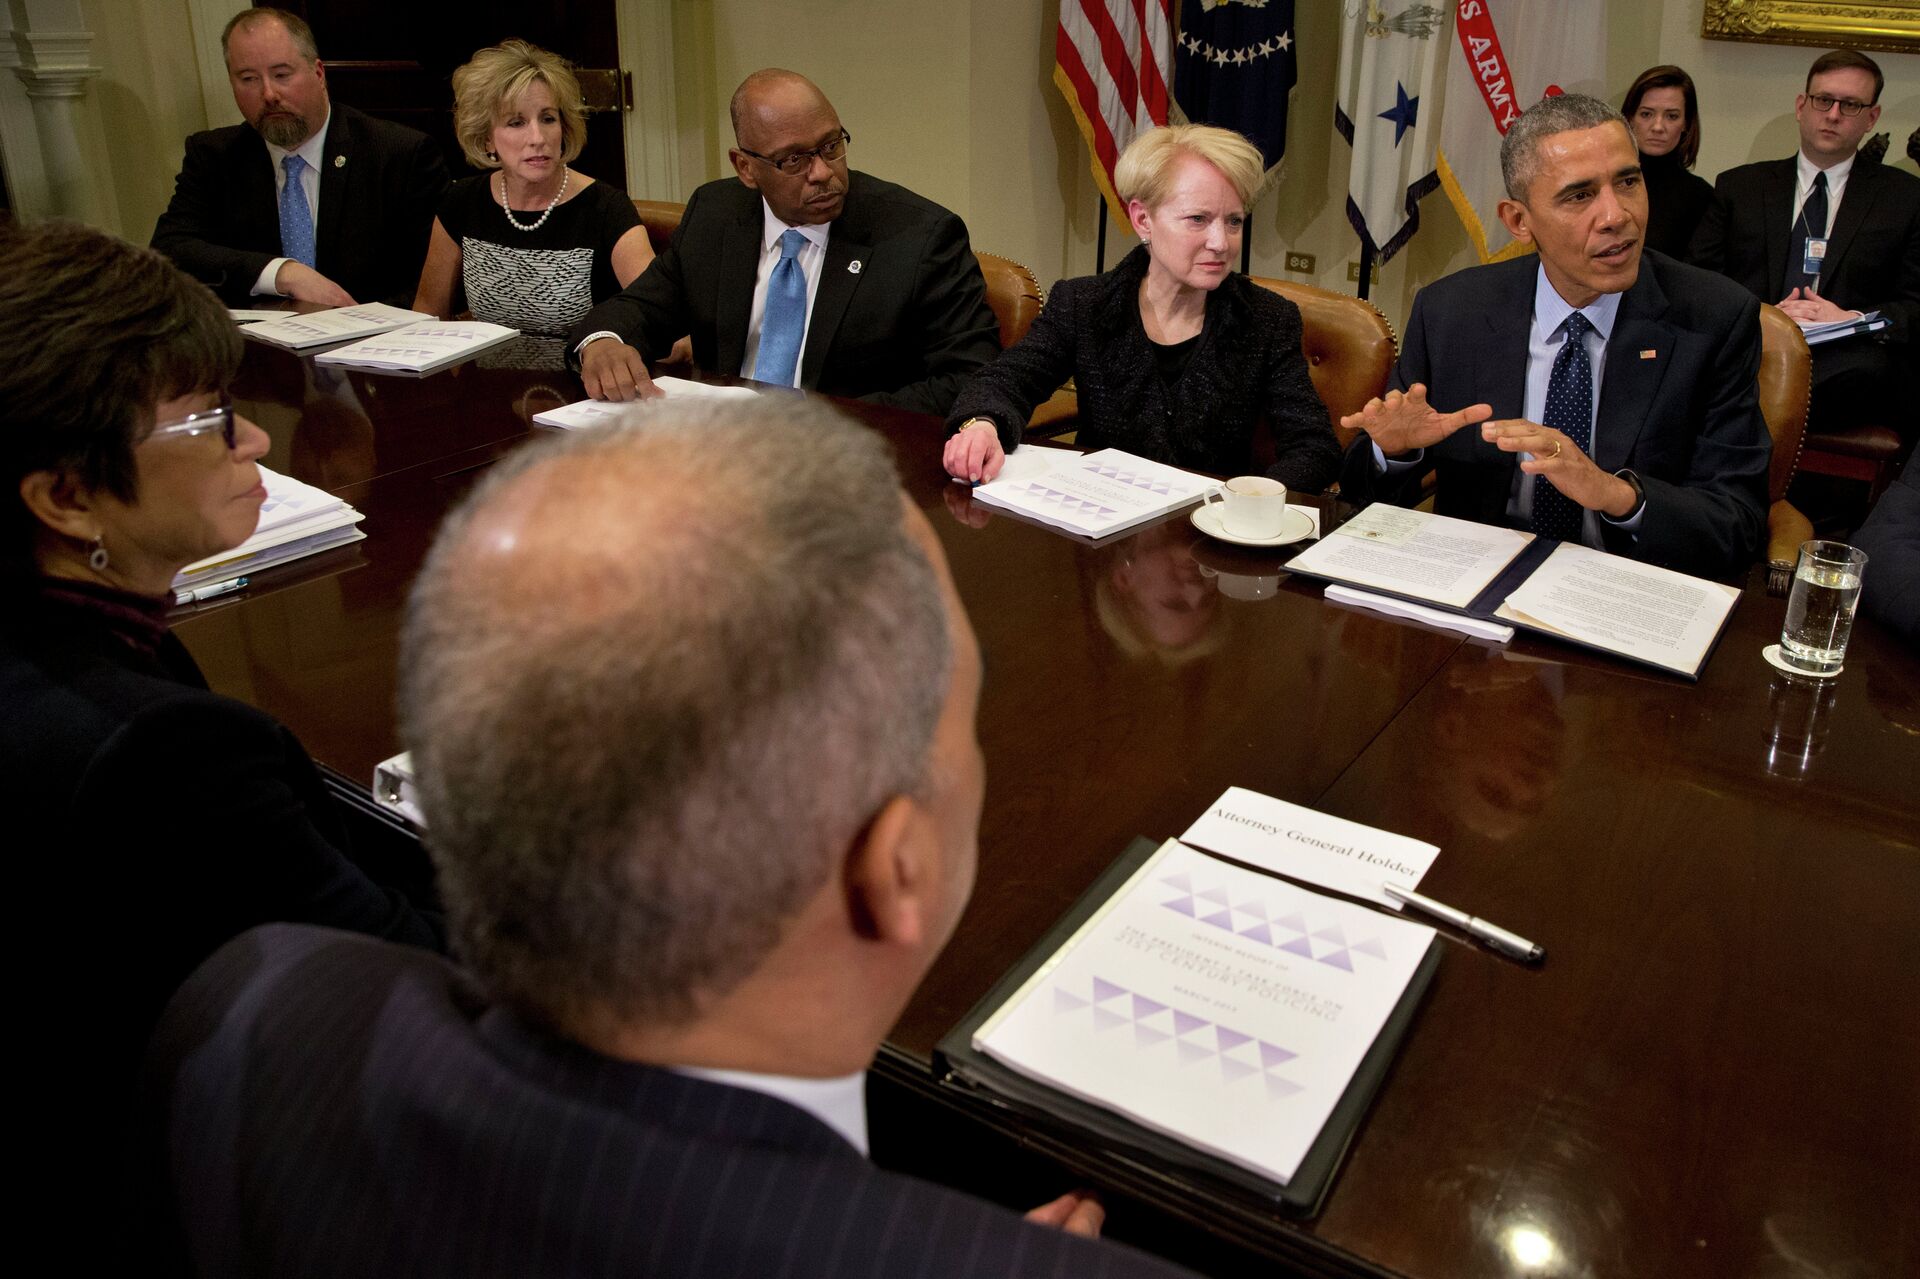 President Barack Obama speaks while meeting with members of the Task Force on 21st Century Policing at the White House on Monday. - Sputnik International, 1920, 16.02.2023